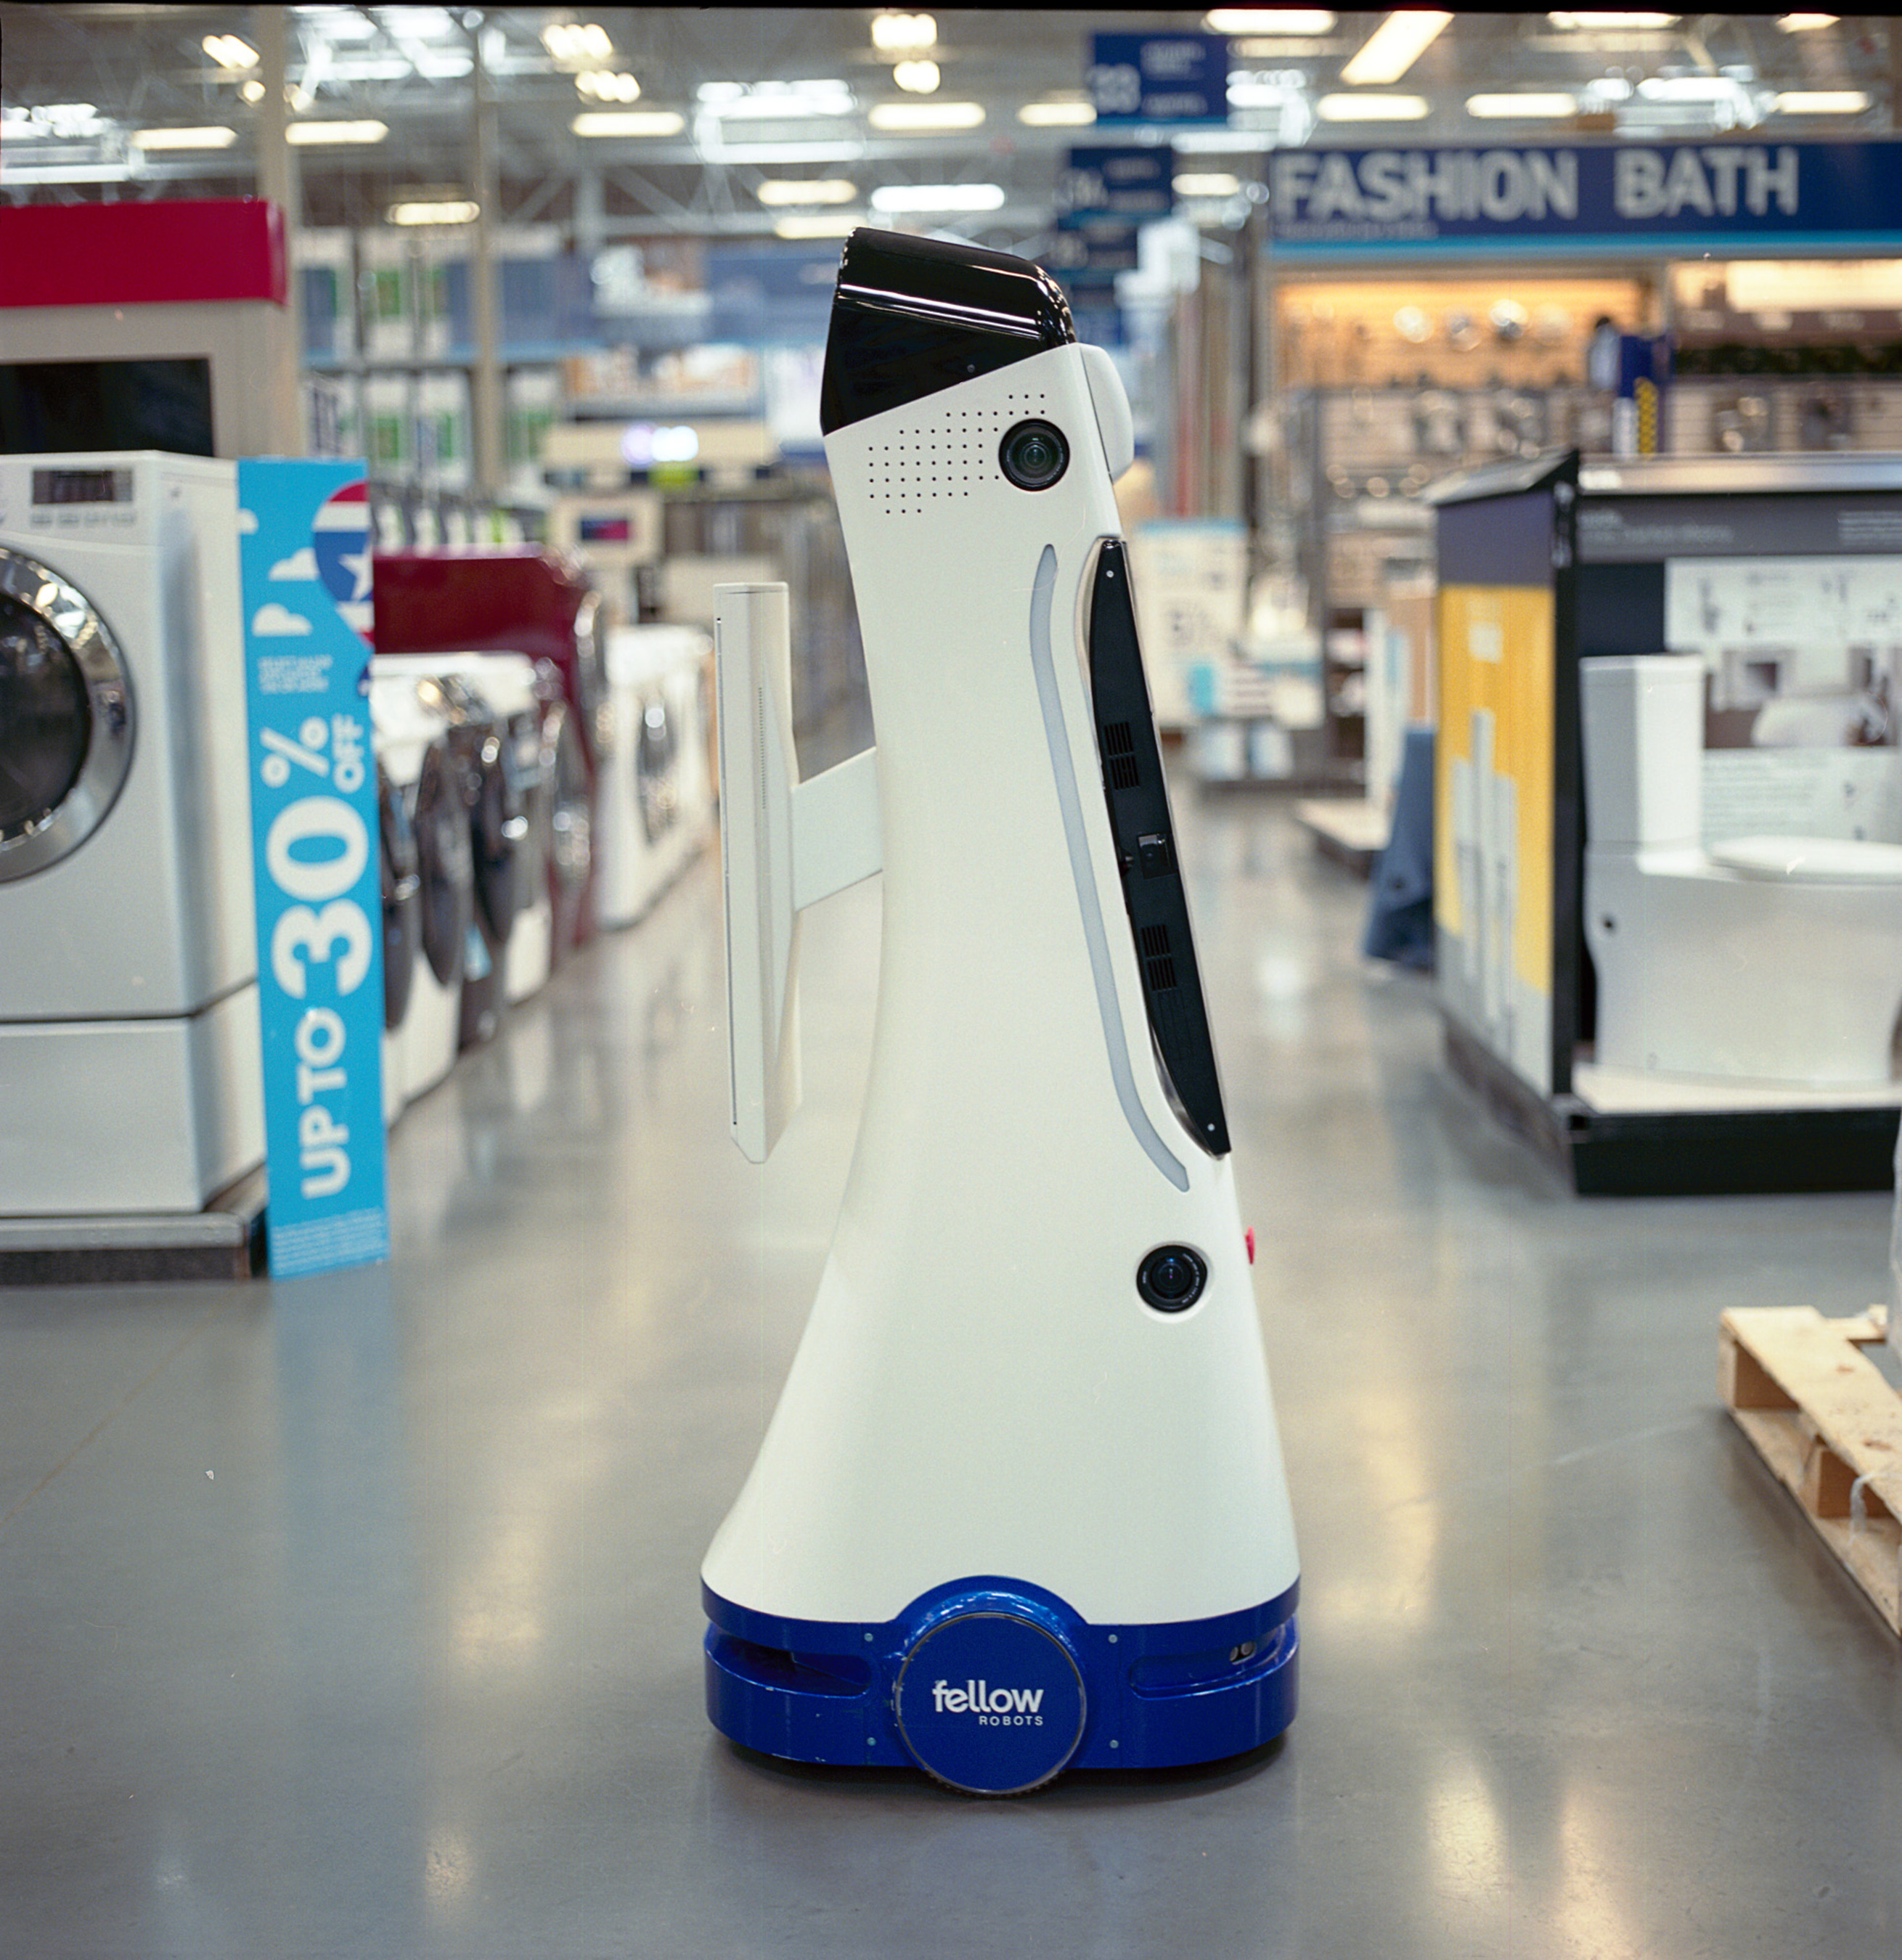 This fall, Lowe's will introduce LoweBot, a NAVii(TM) autonomous retail service robot by Fellow Robots, in 11 Lowe's stores throughout the San Francisco Bay area.